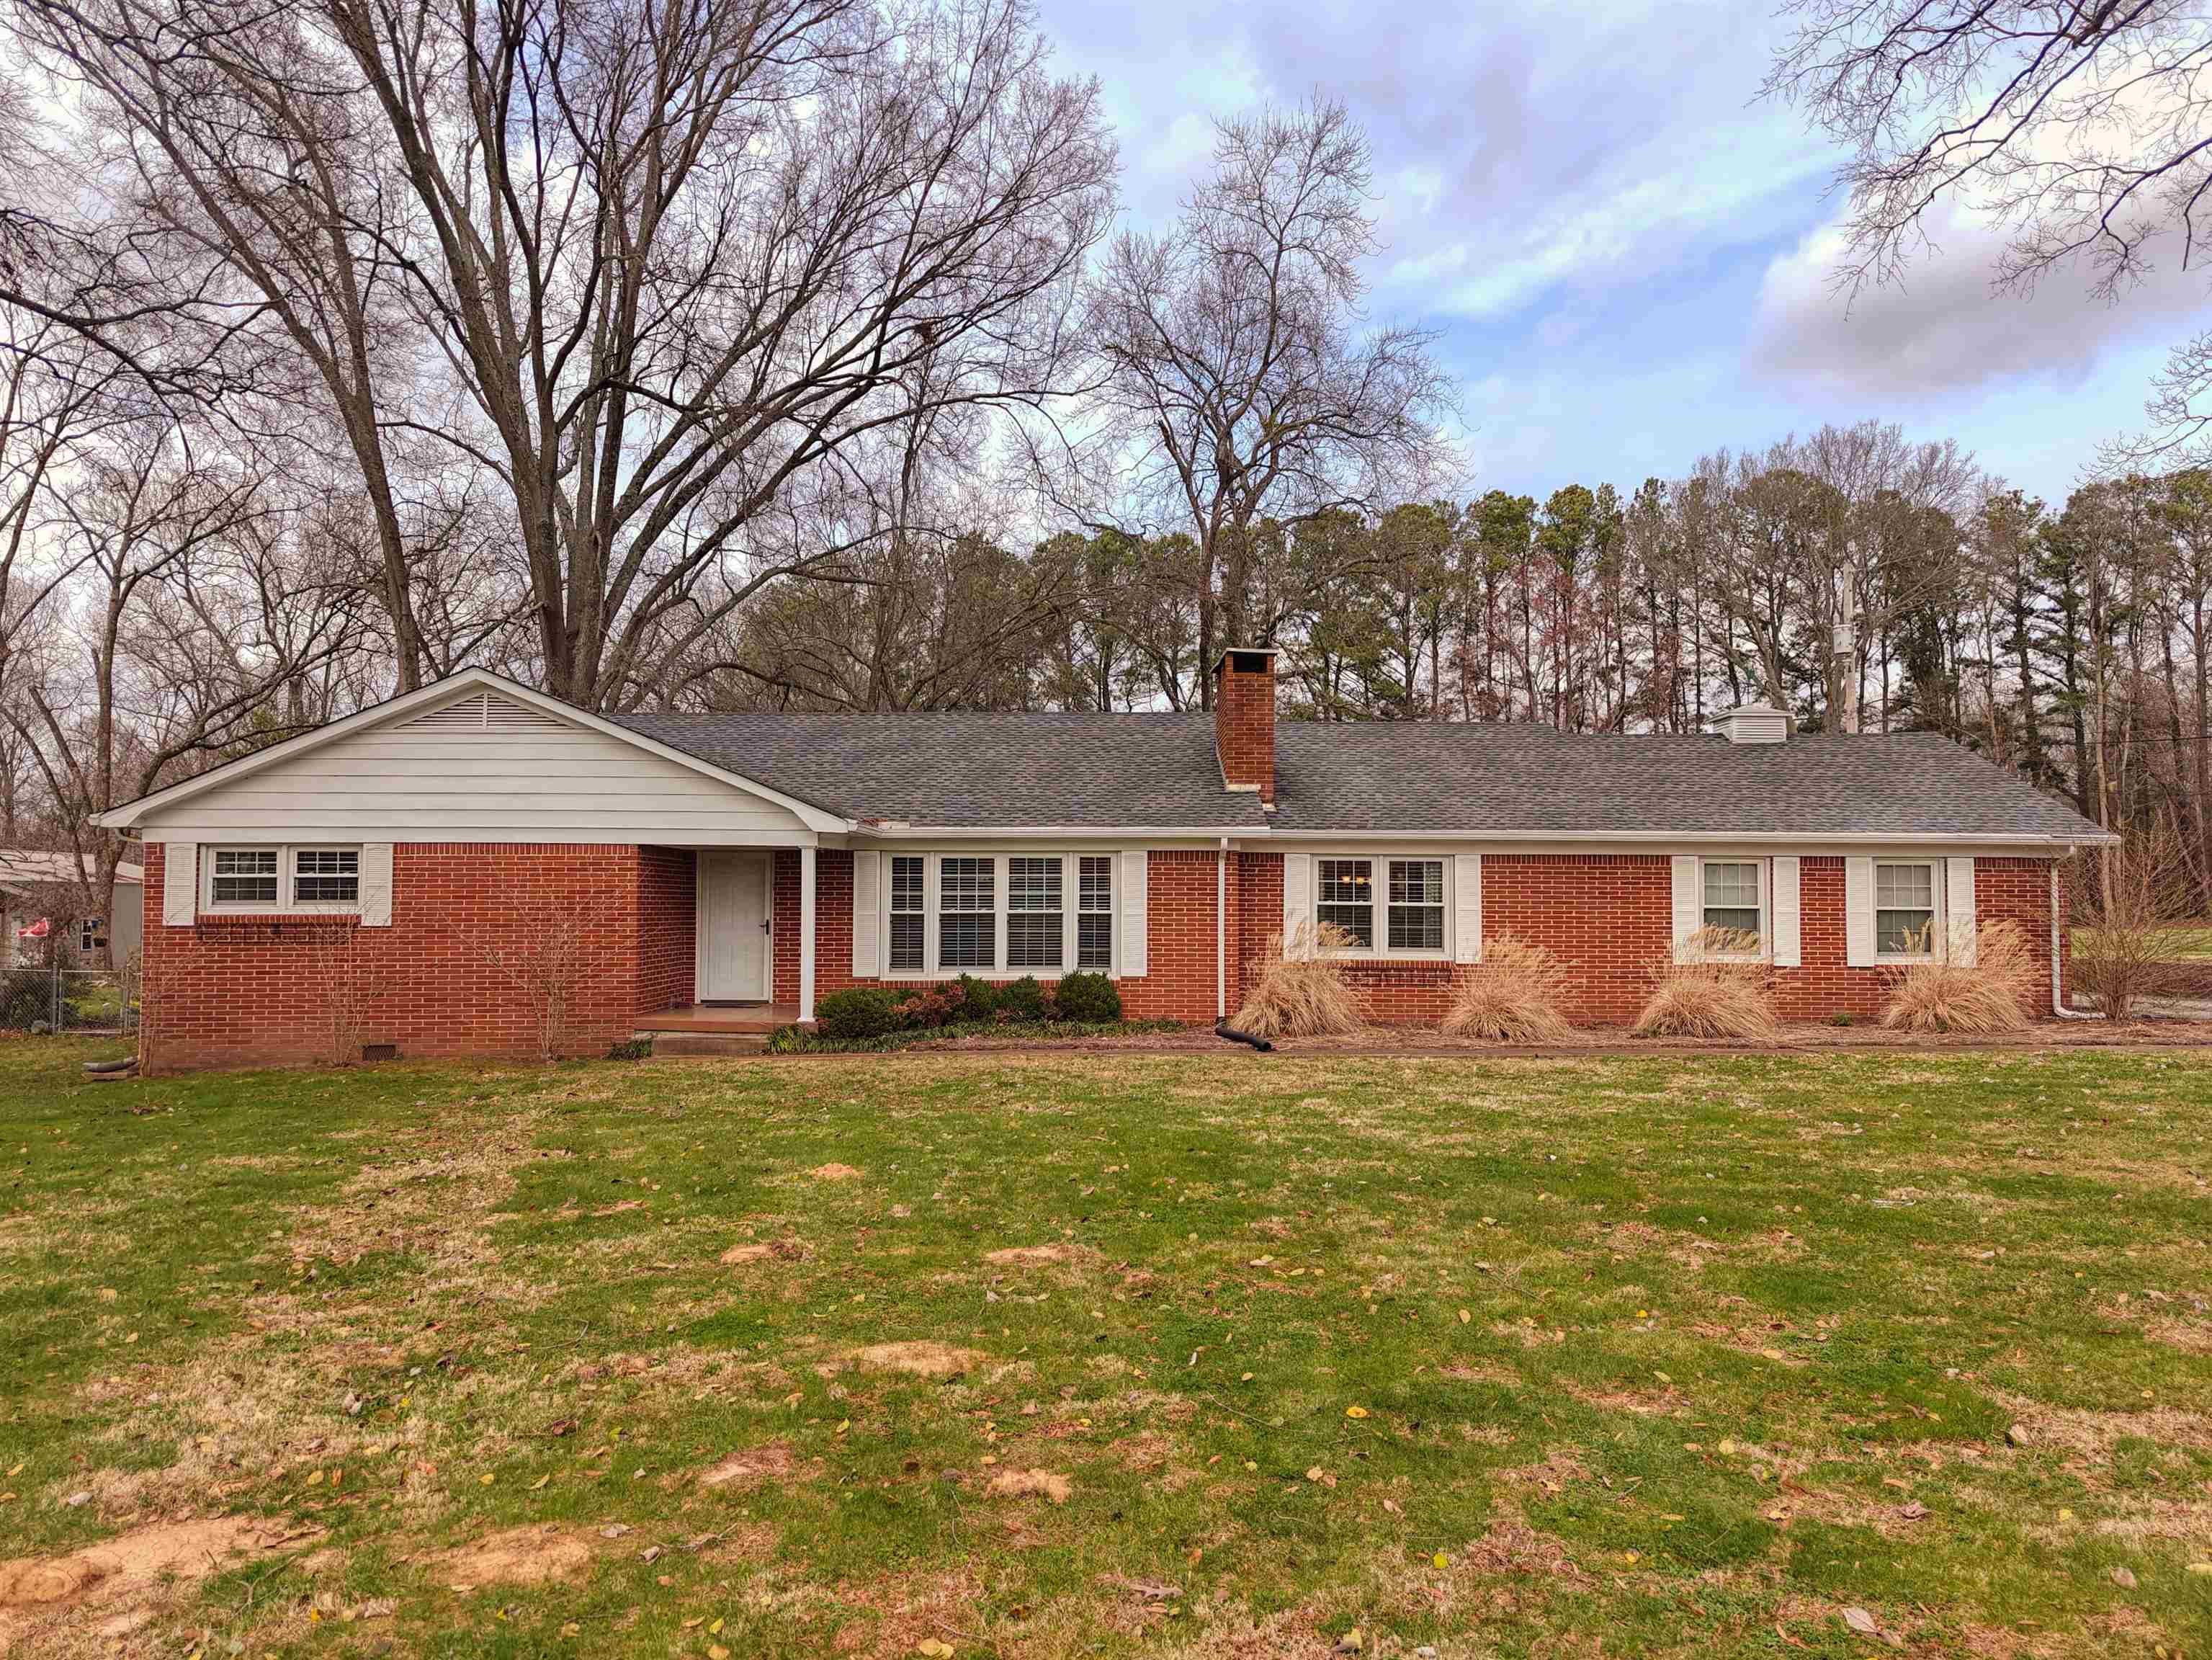 16265 Highland Drive, McKenzie, Tennessee 38201, 3 Bedrooms Bedrooms, ,1 BathroomBathrooms,Residential,For Sale,16265 Highland Drive,240838